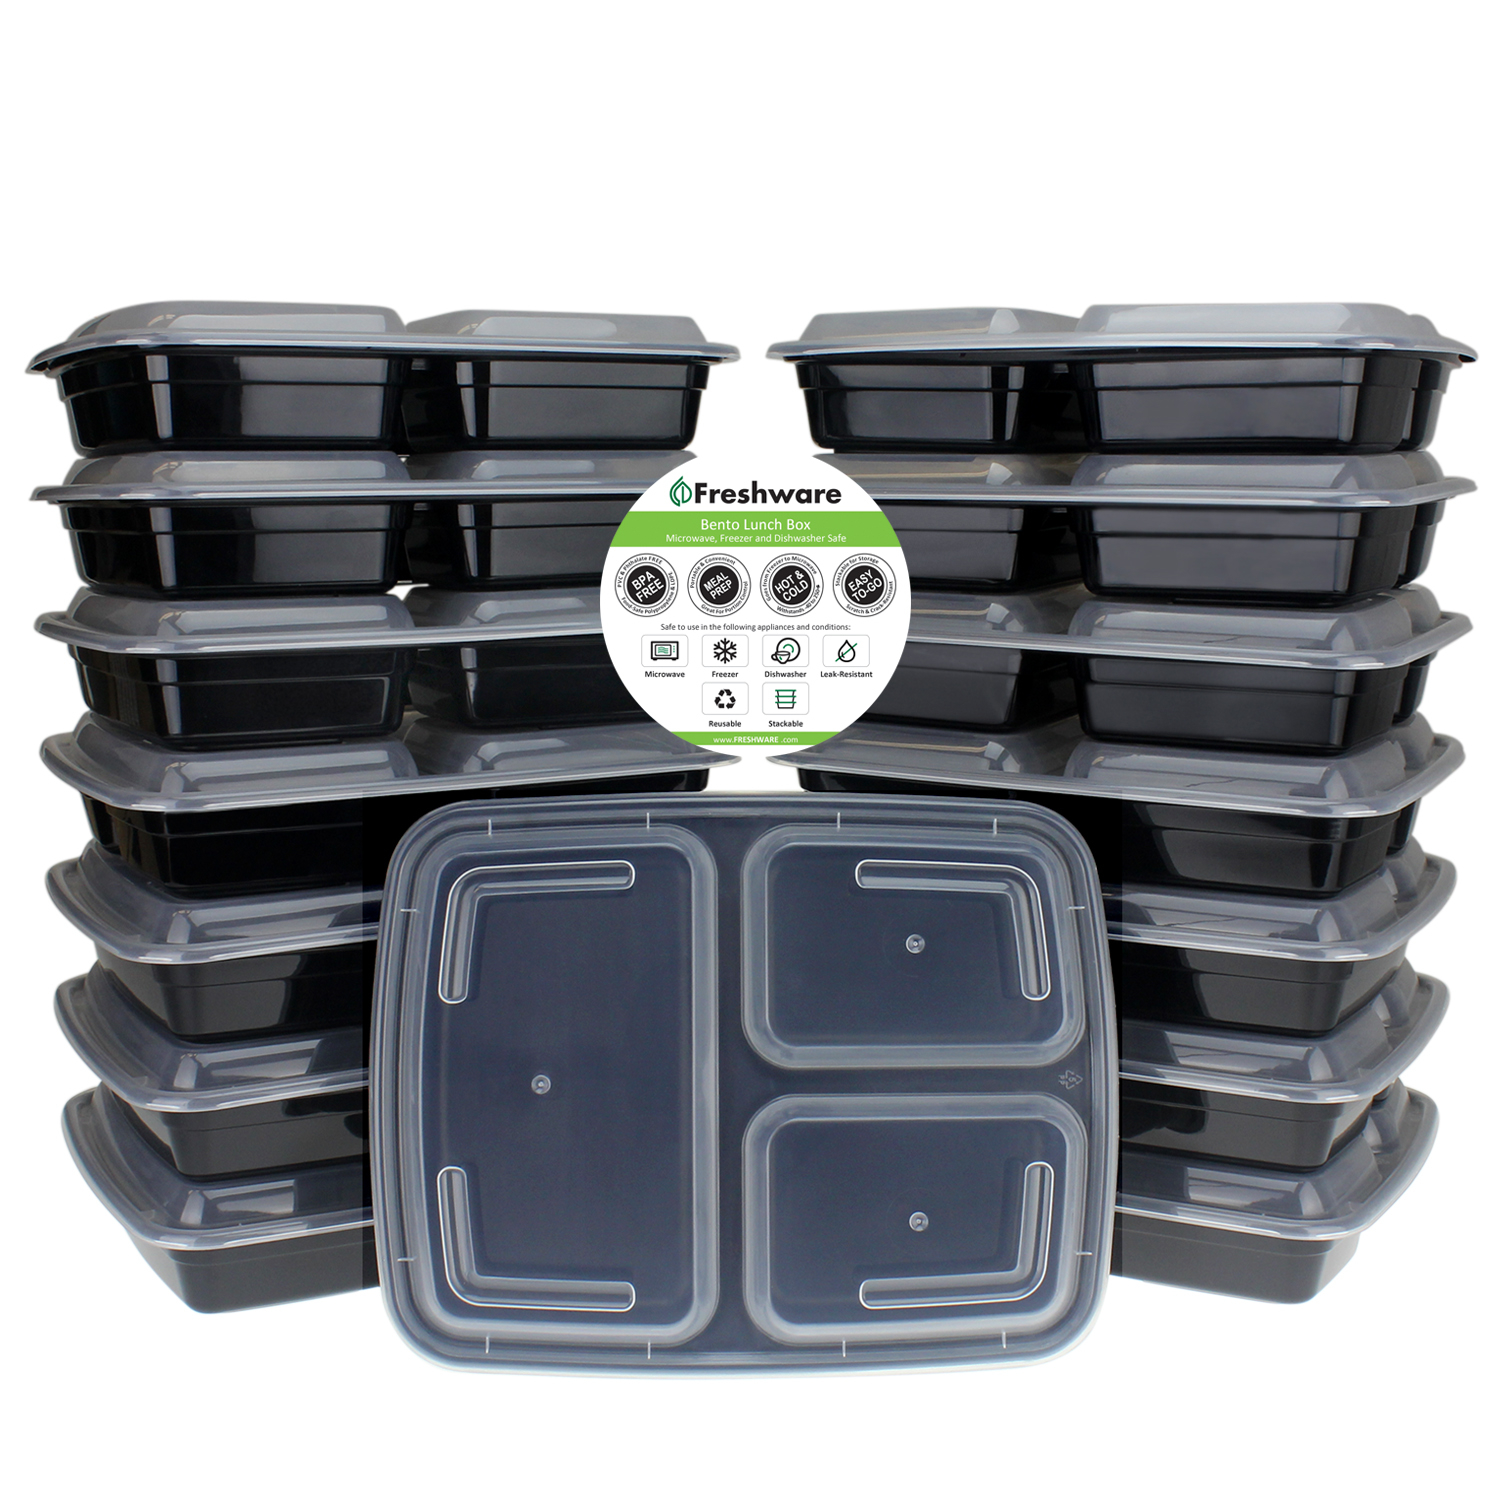 Freshware 15-Pack 3 Compartment Bento Lunch Boxes with Lids - Meal Prep, Portion Control, 21 Day Fix & Food Storage Containers (32oz)